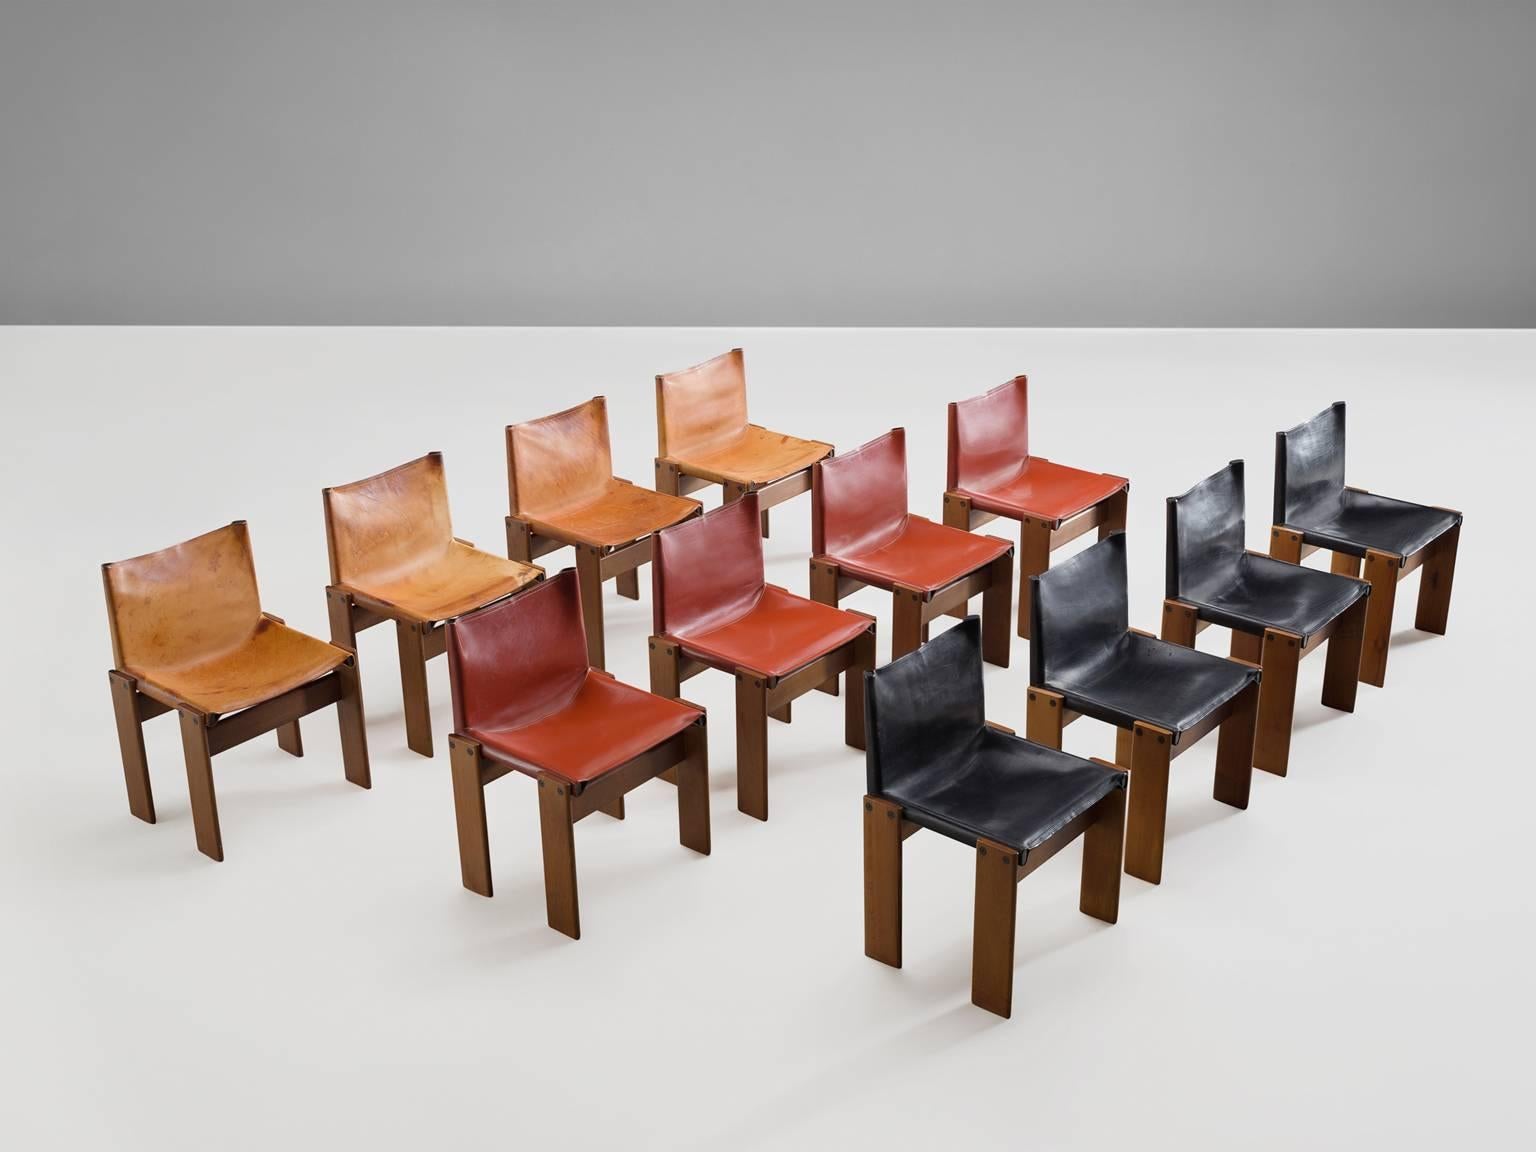 Dining chairs by Arfa & Tobia Scarpa, oak and cognac leather, Italy, 1974.

These 12 chairs are strong and sturdy in their design. The wonderfully warm leather in three colors is very well suited to the patinated walnut. Interesting is the 'flat'